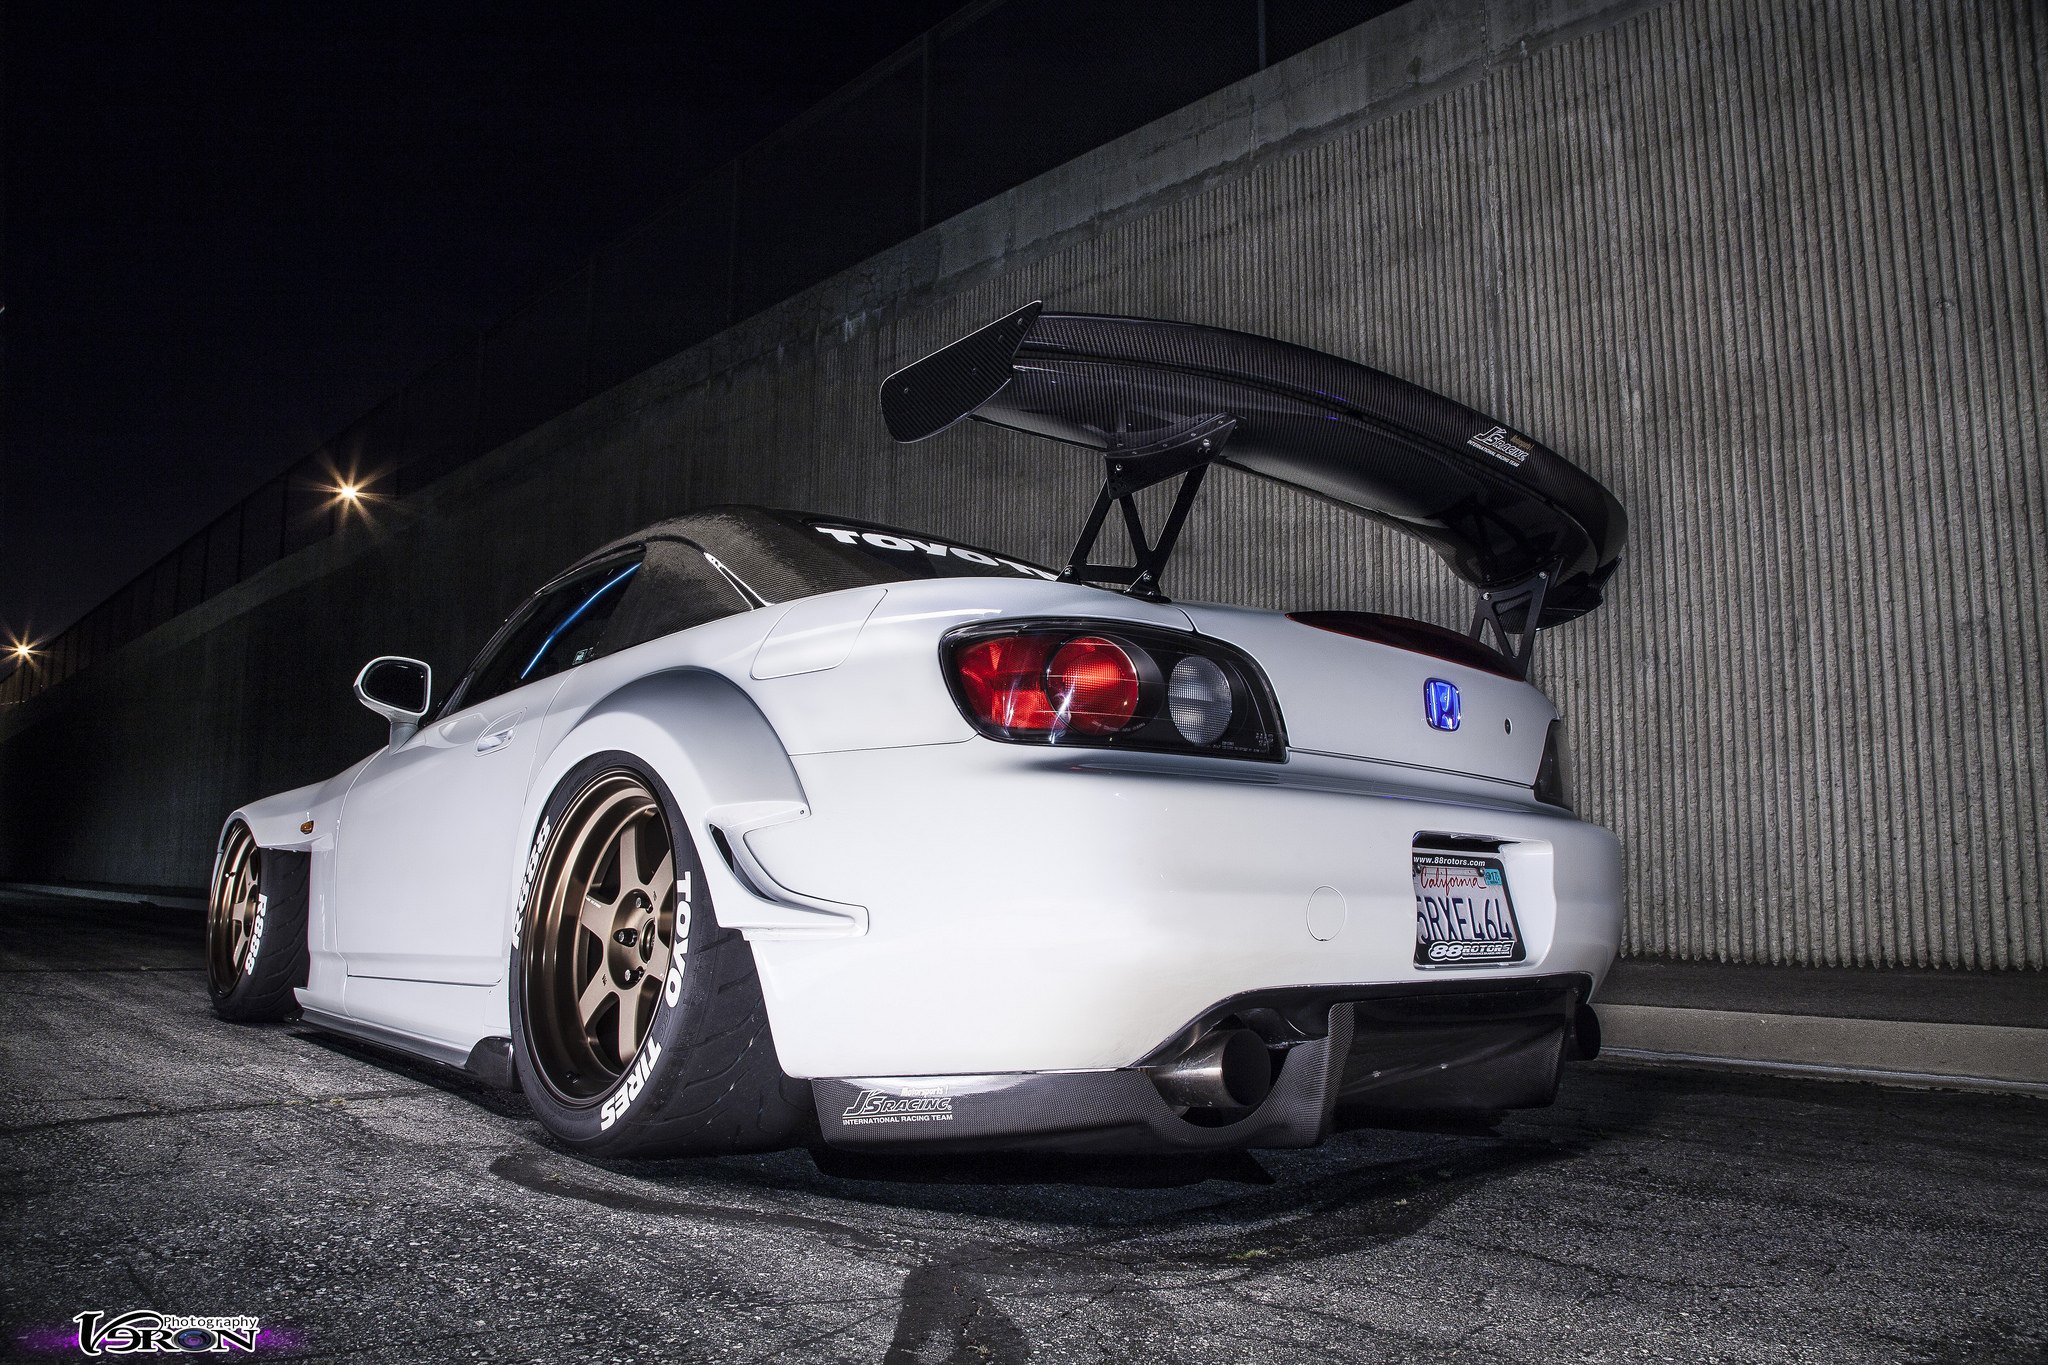 White Honda S2000 with Large Wing Spoiler - Photo by Manuel Veron